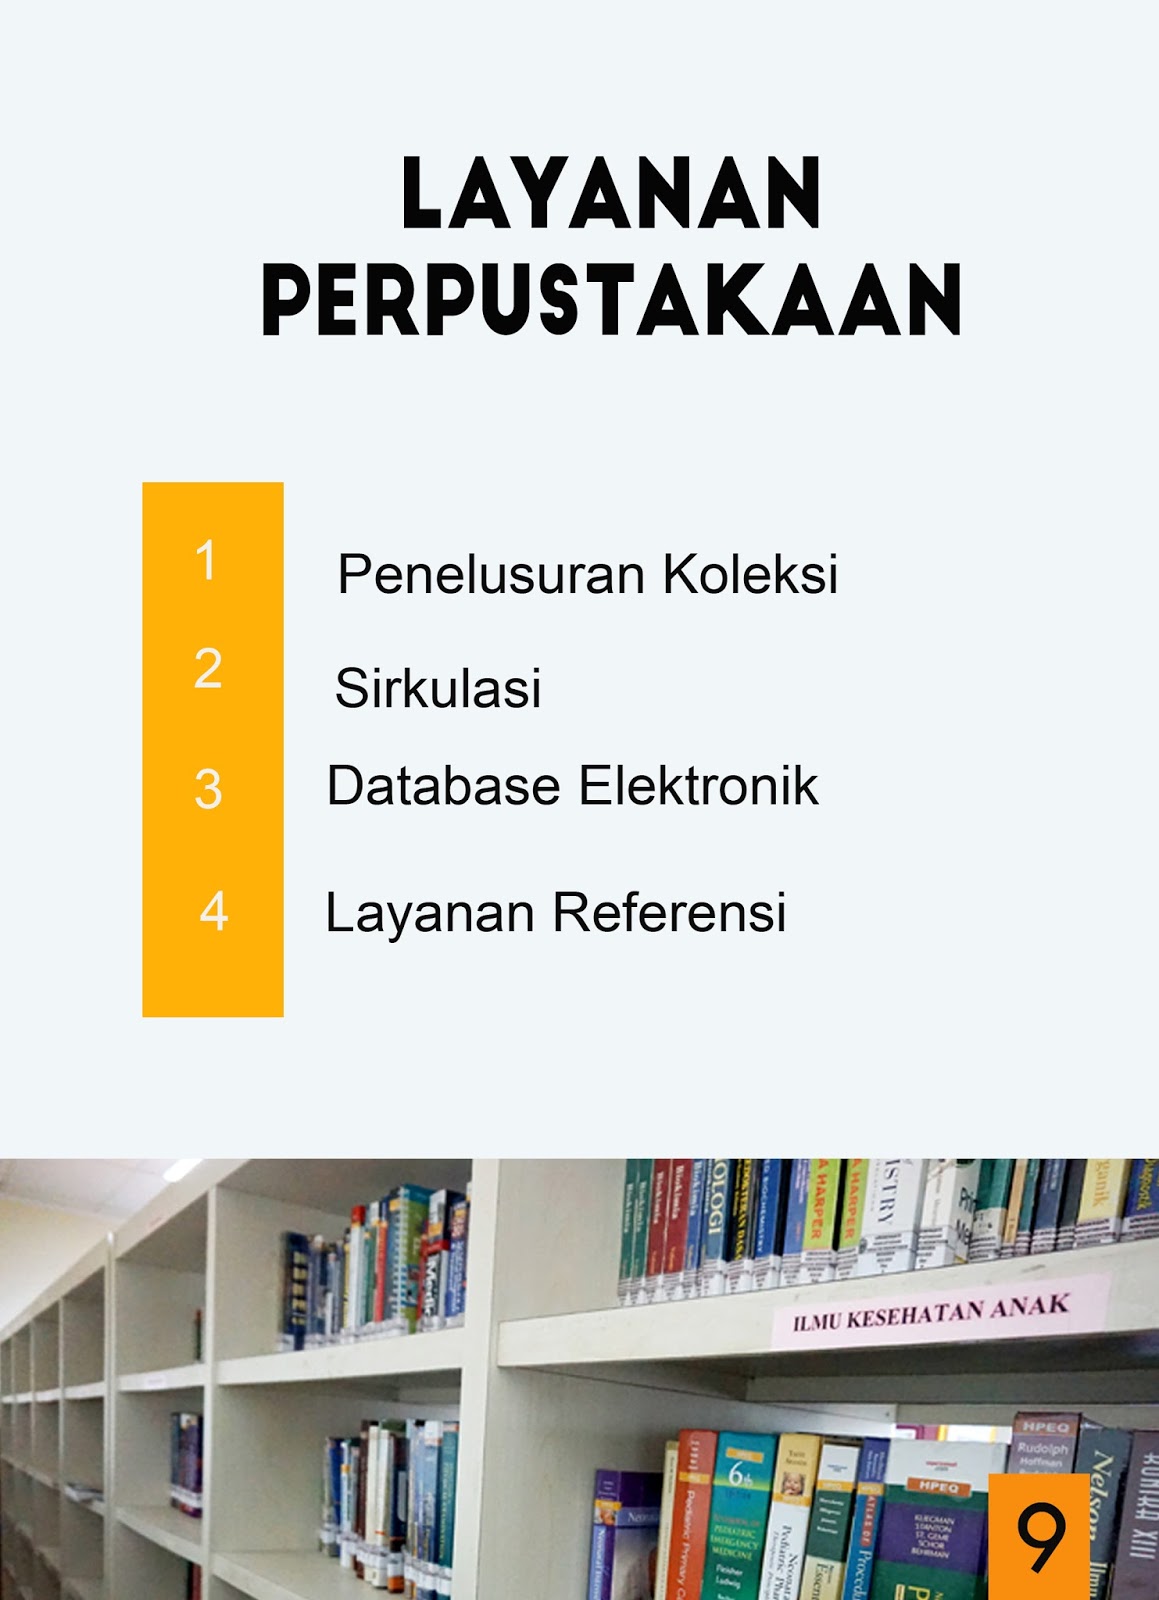 Libraries guide